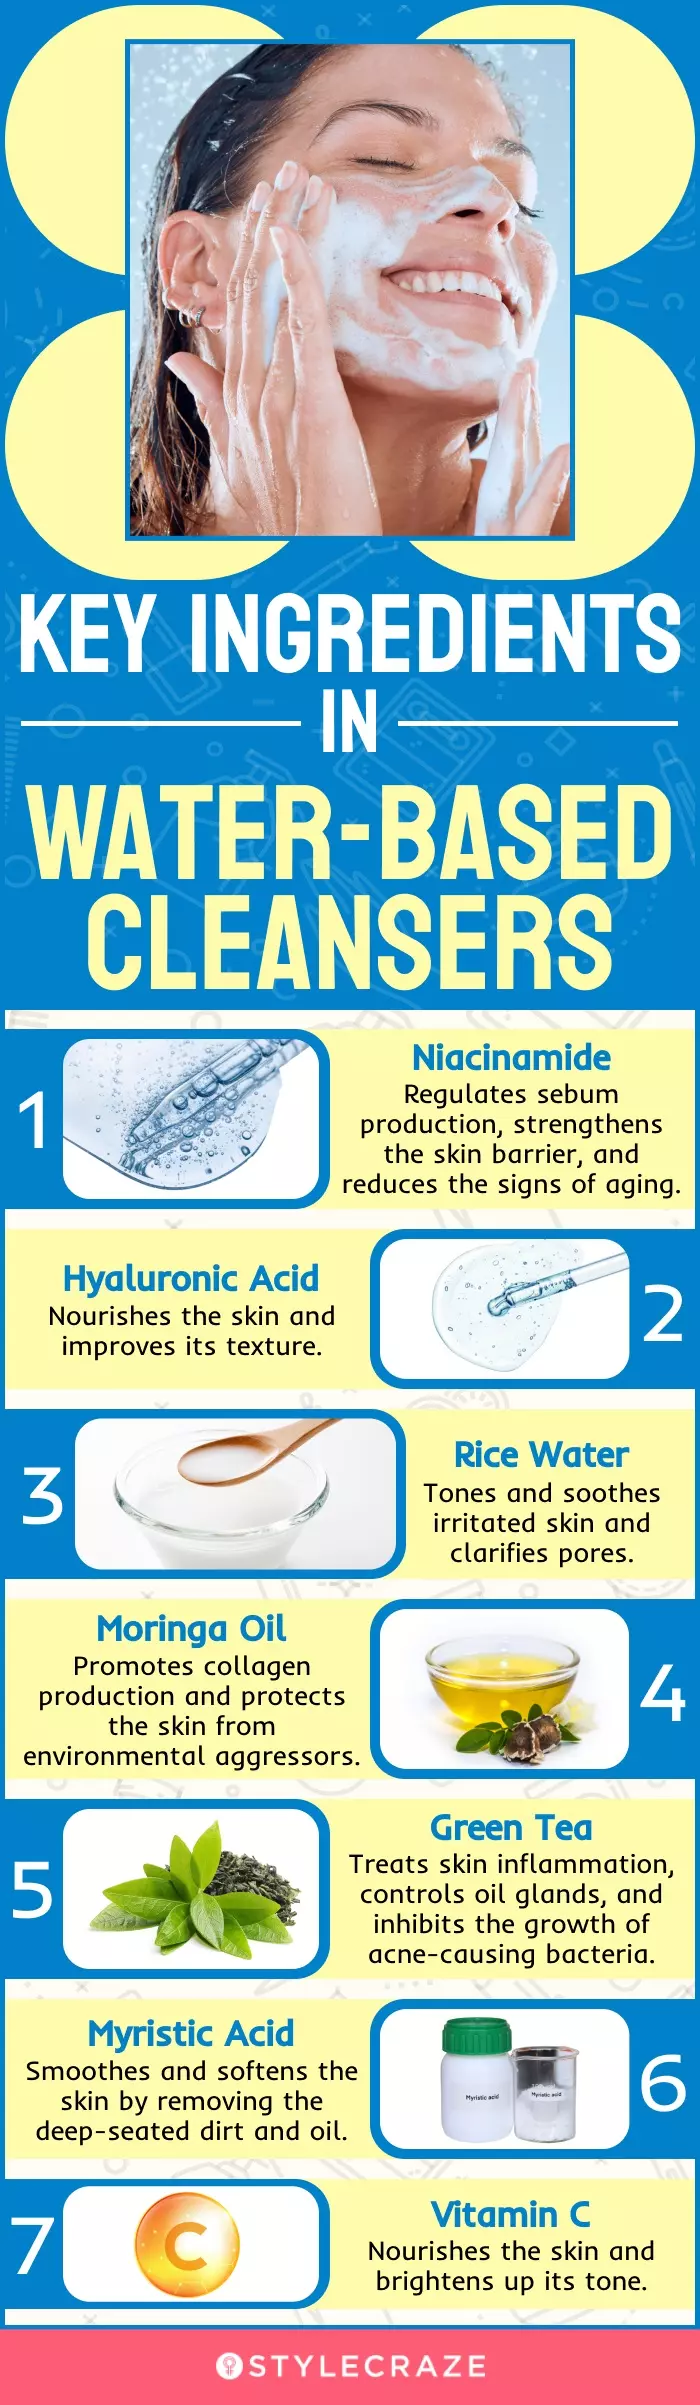 Key Ingredients In Water-Based Cleansers (infographic)